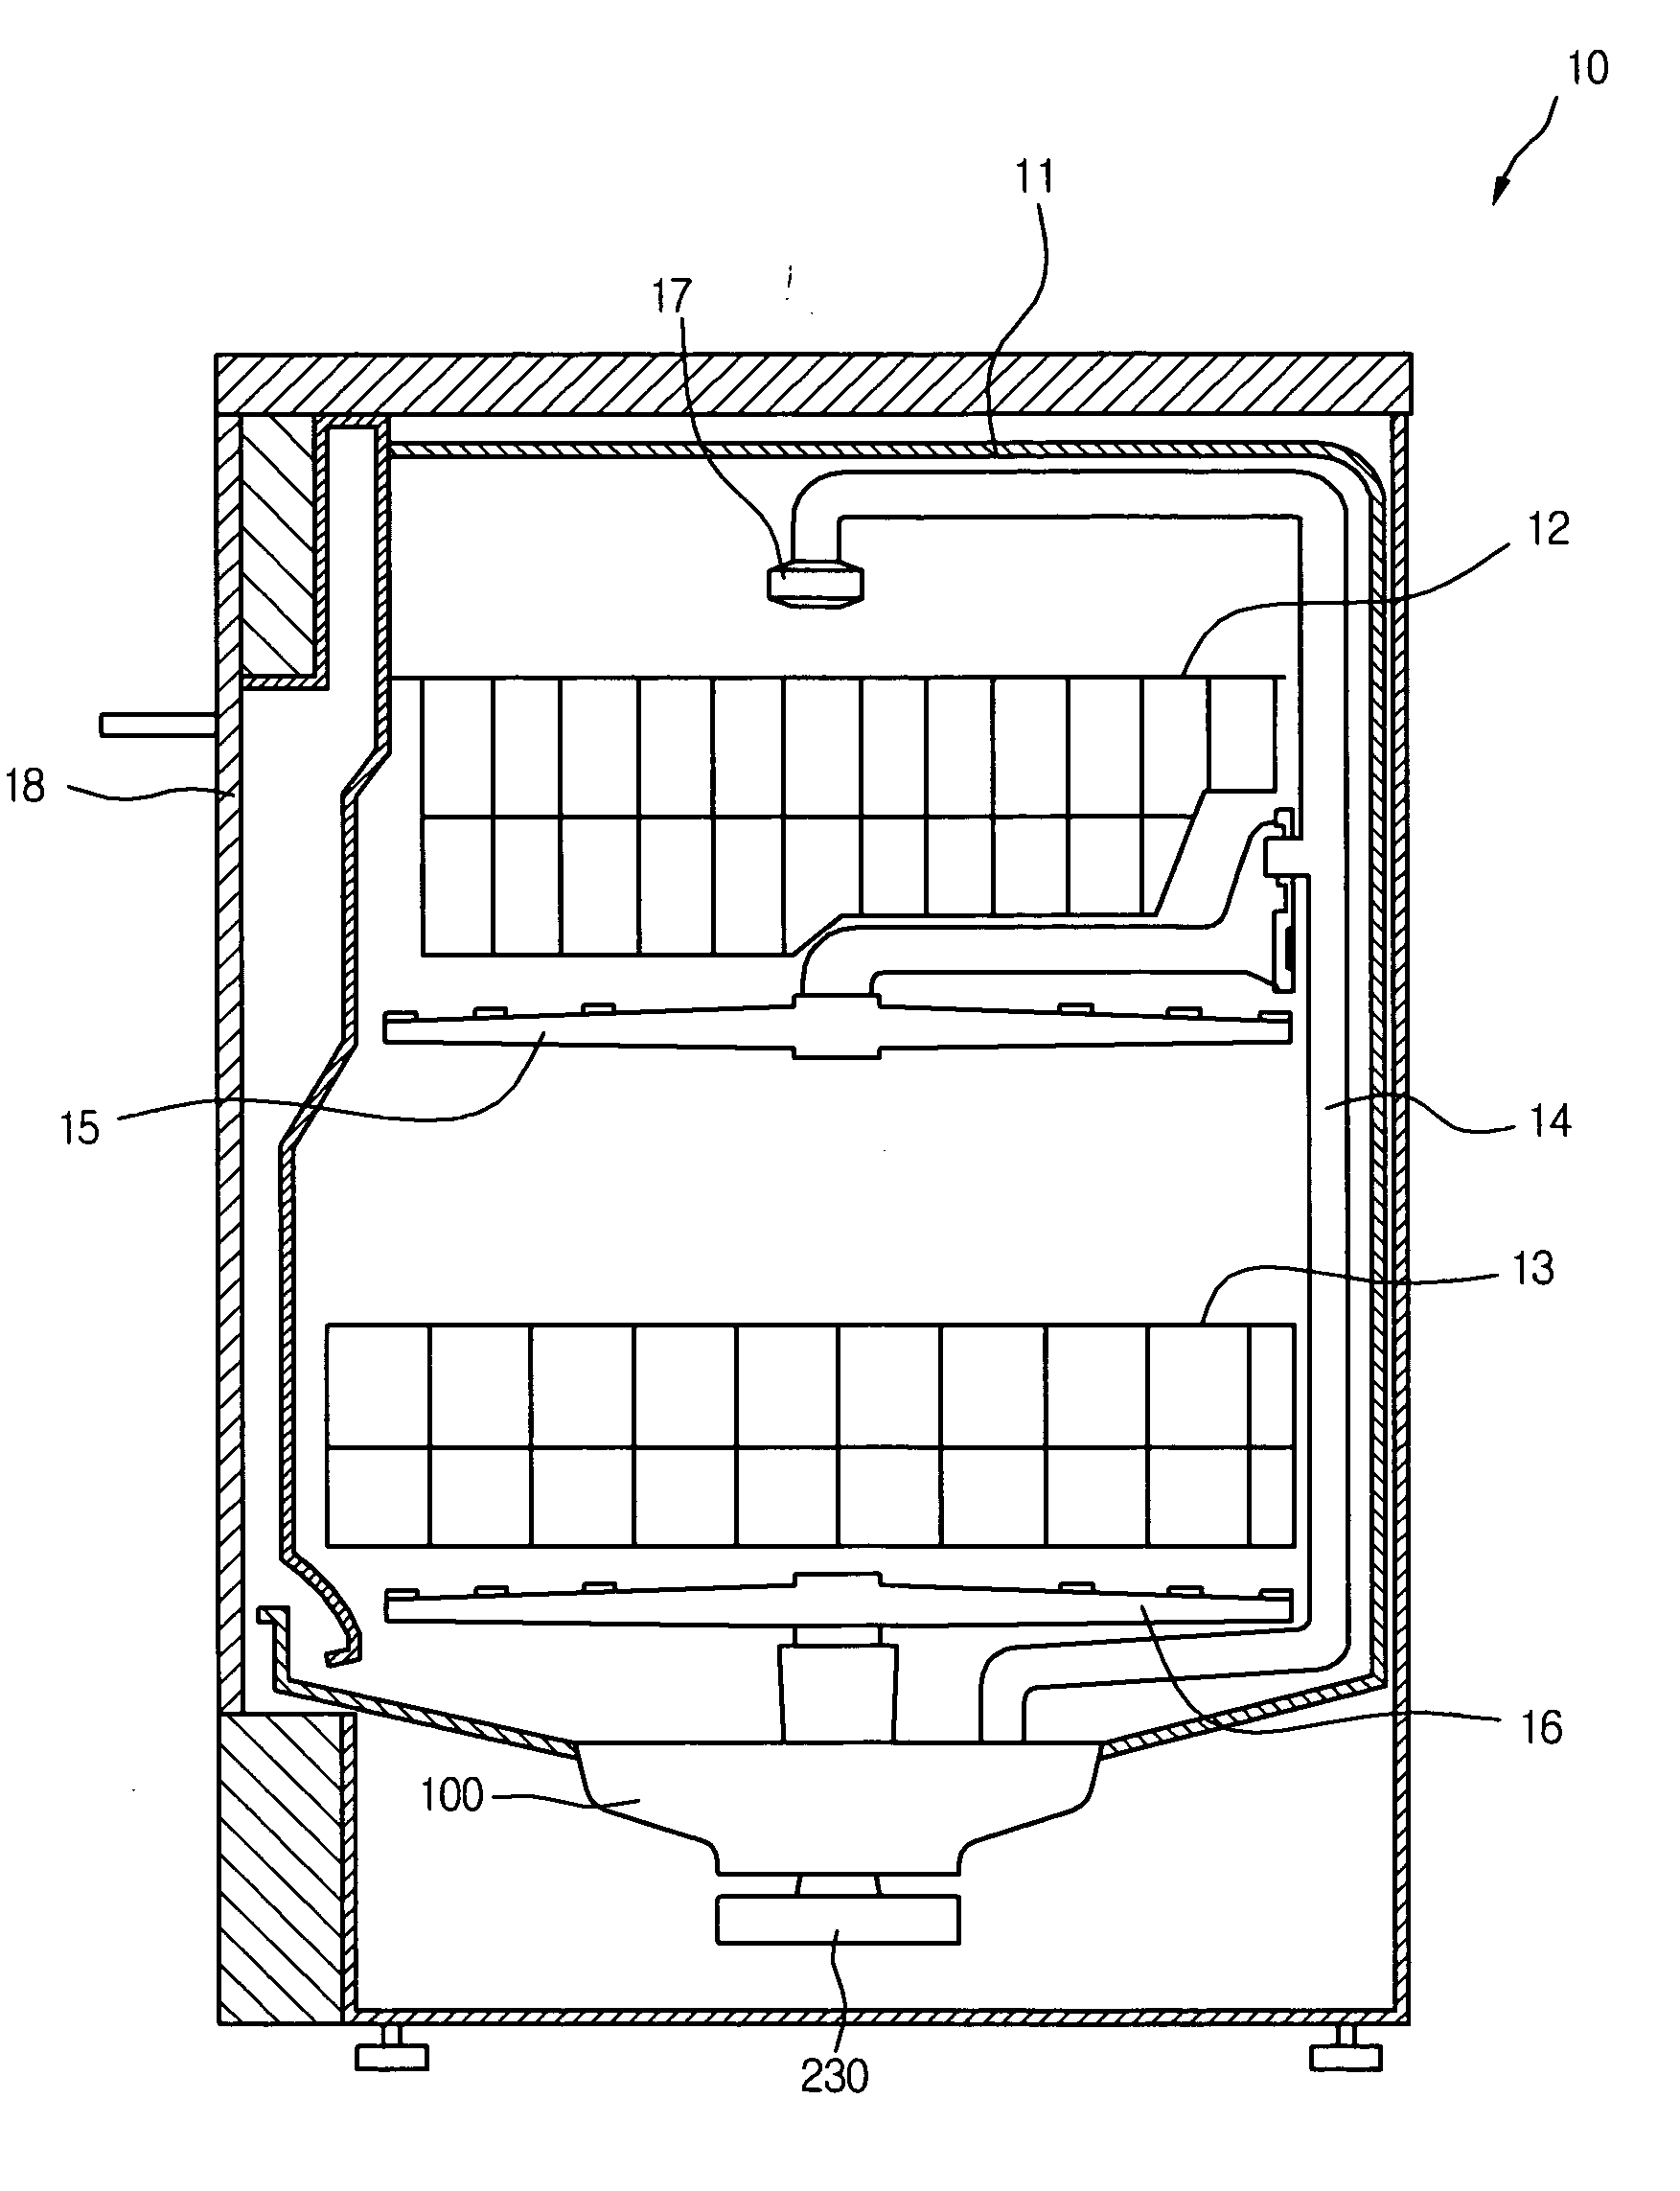 Sump of dish washer